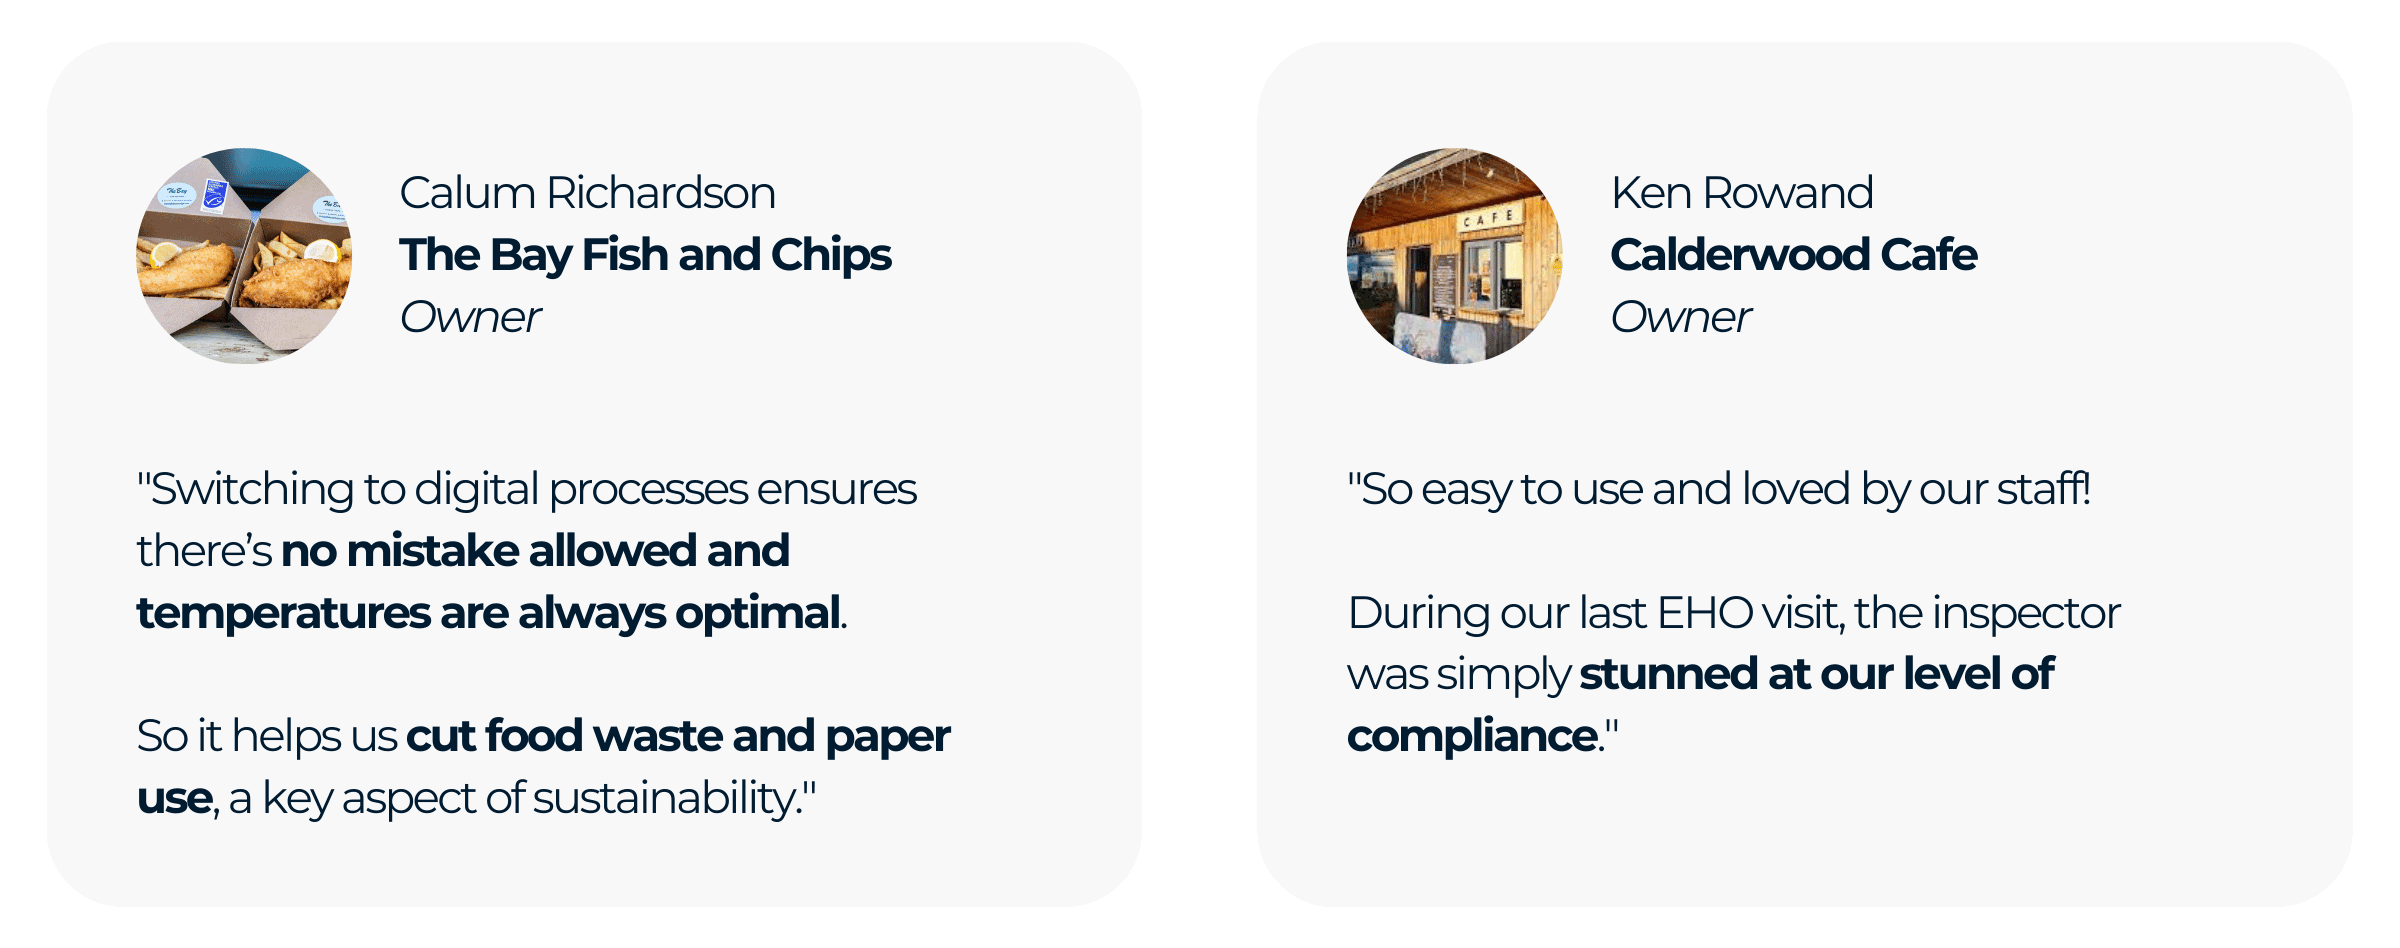 Case studies about Digital Food Safety from The Bay Fish and Chips and Calderwood Cafe